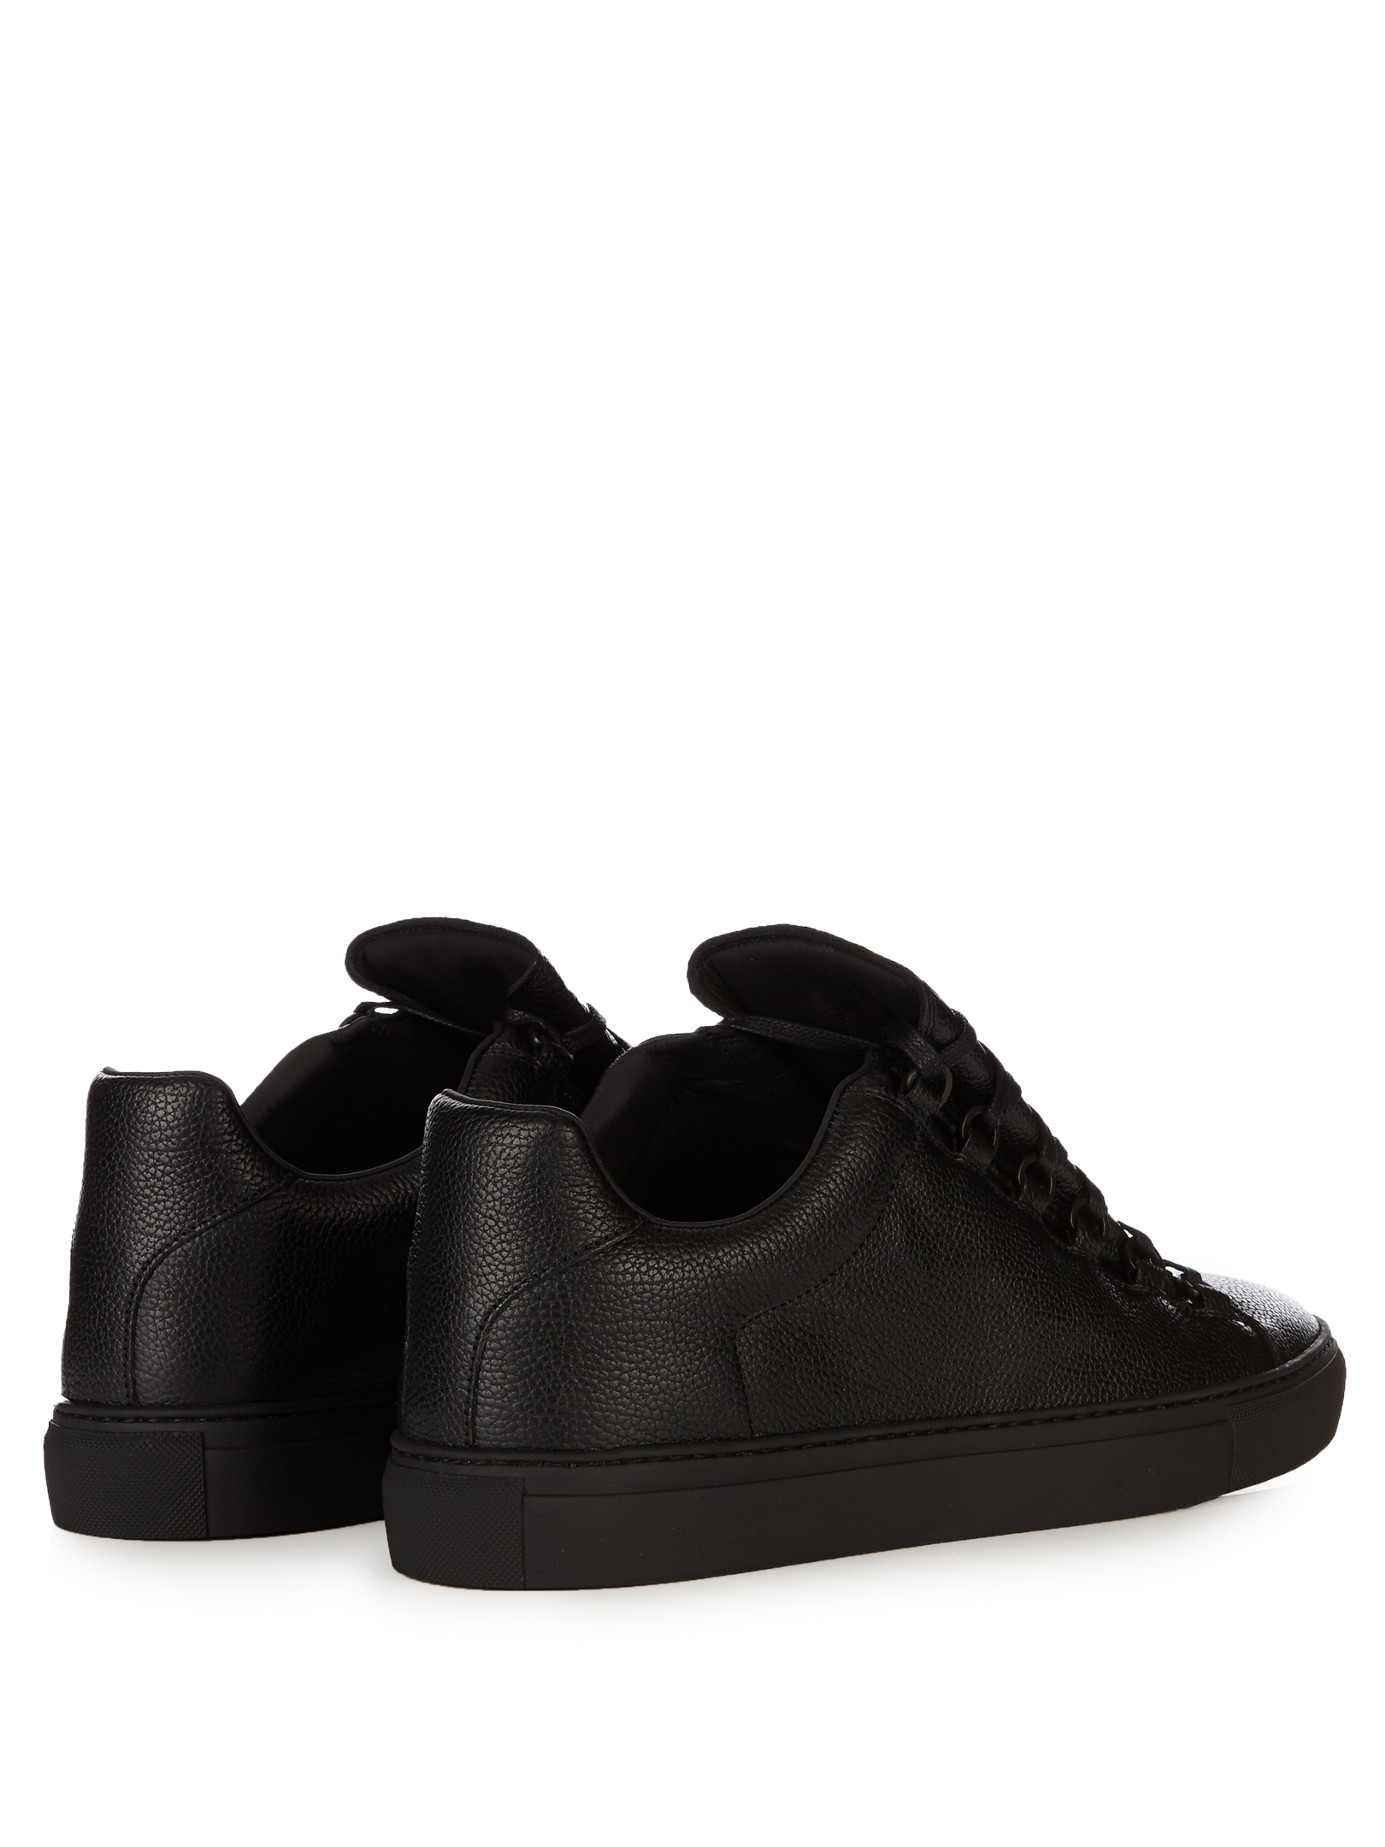 Balenciaga Arena Leather Low-Top Sneakers in Black for Men | Lyst